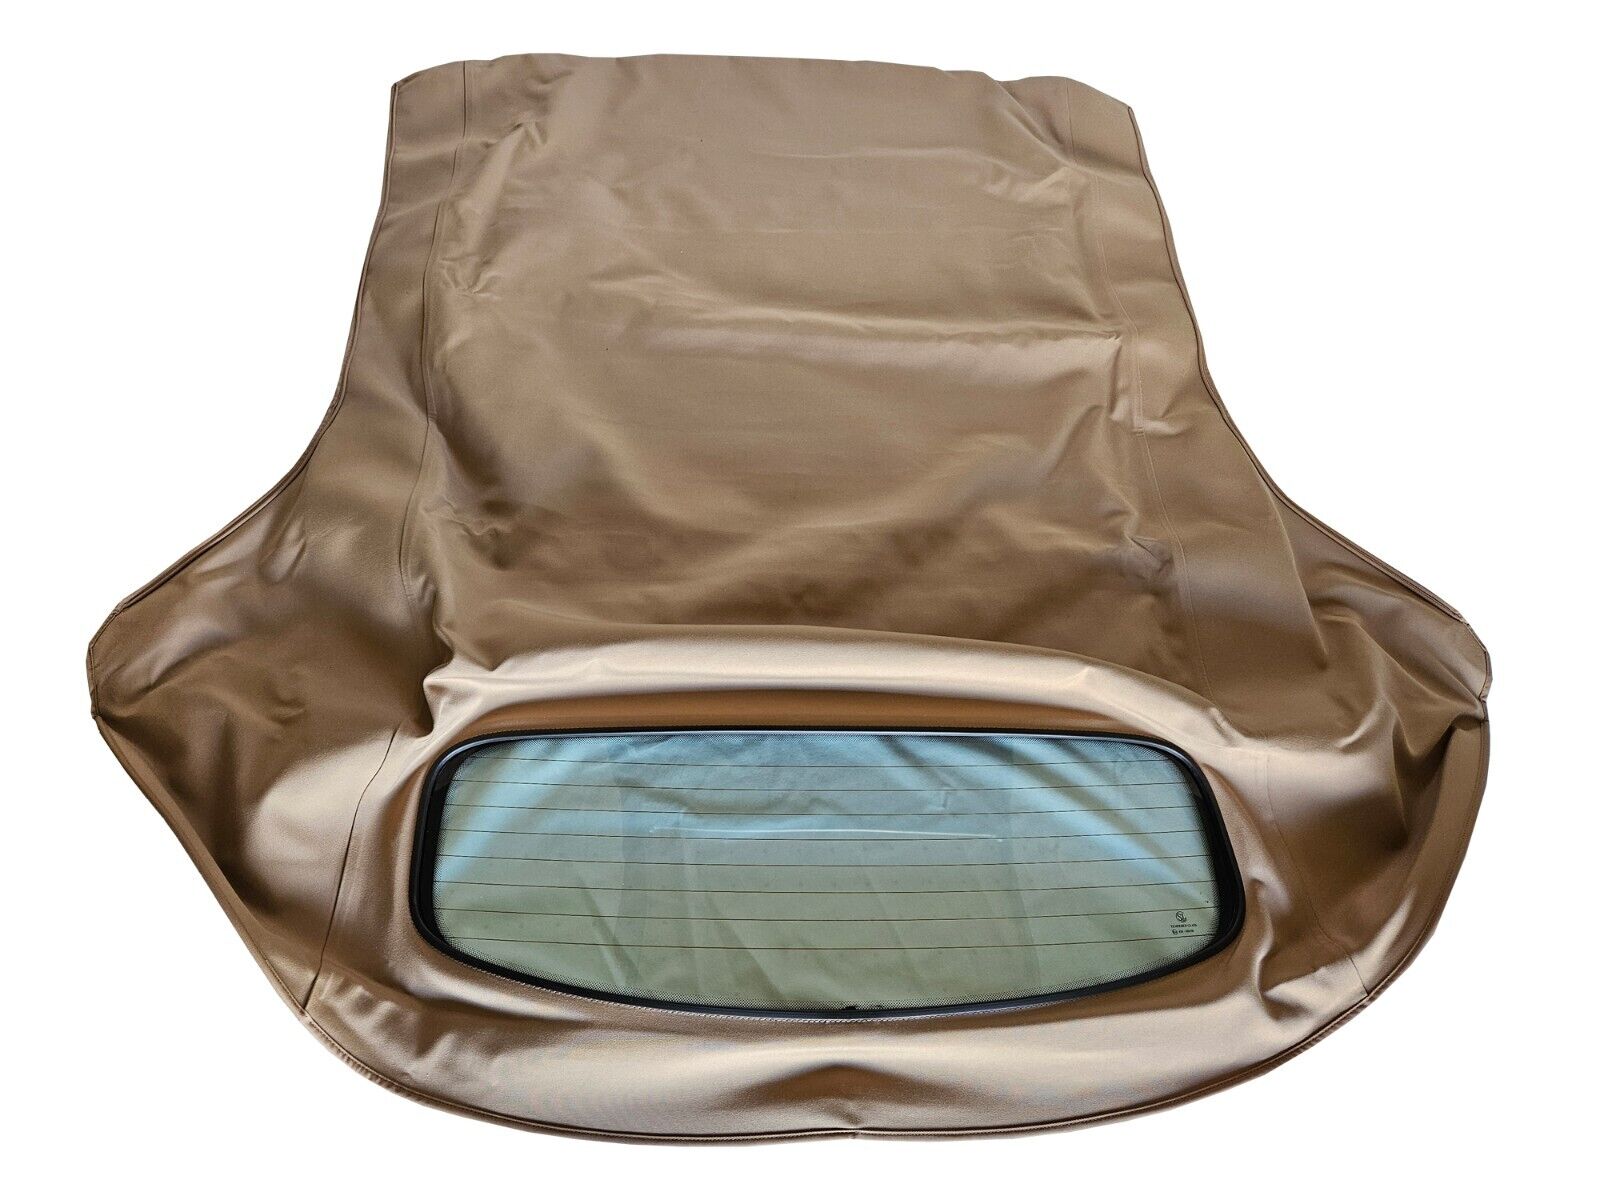 Fits Volvo C70 Convertible Top Replacement & Glass window 1999-06 Tan Cloth